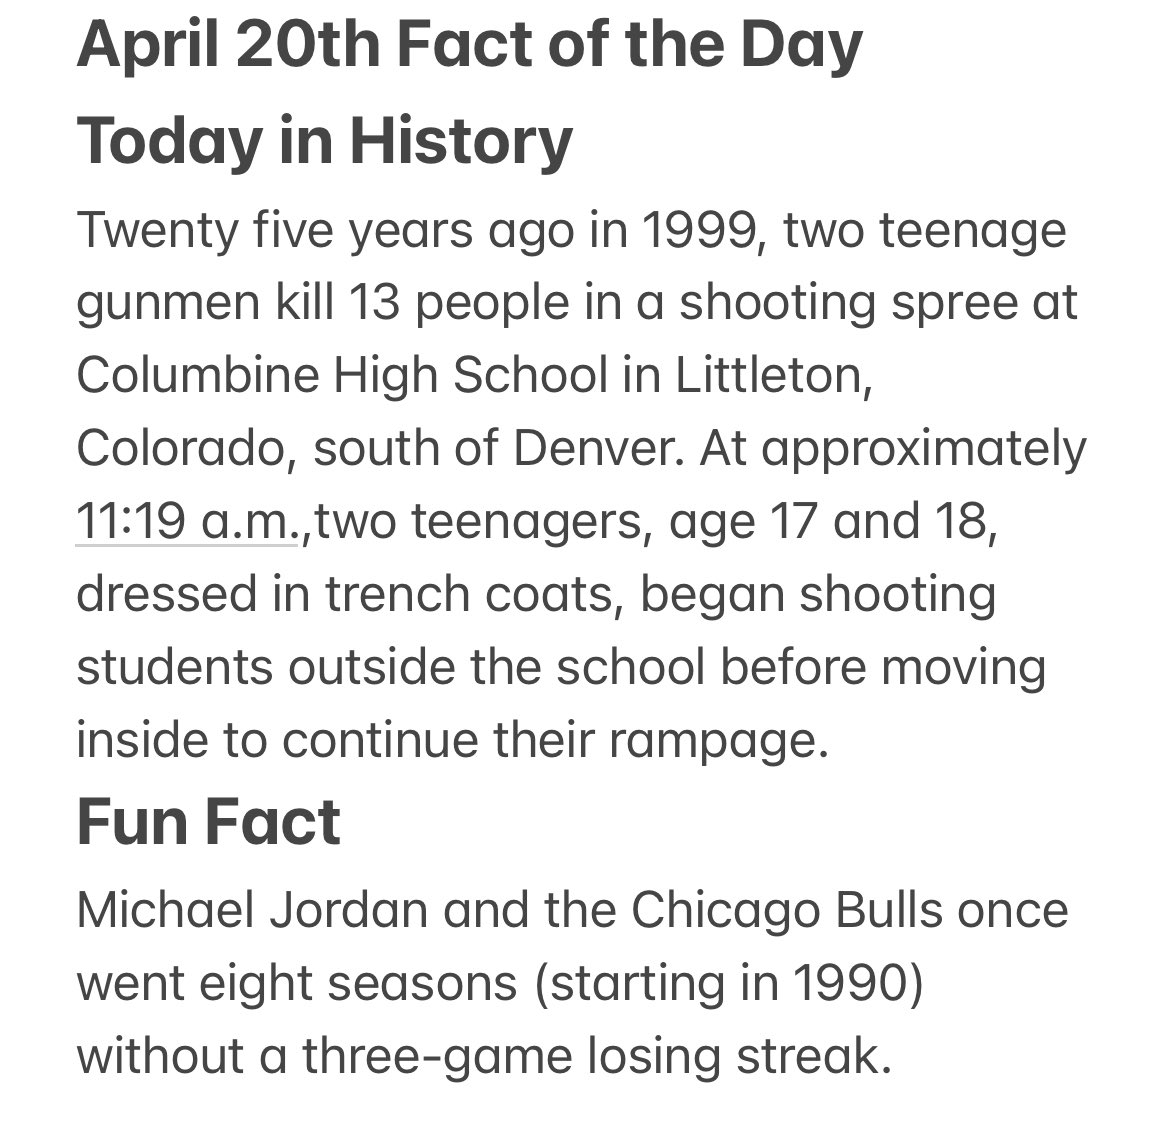 Fact of the Day for April 20th #factoftheday